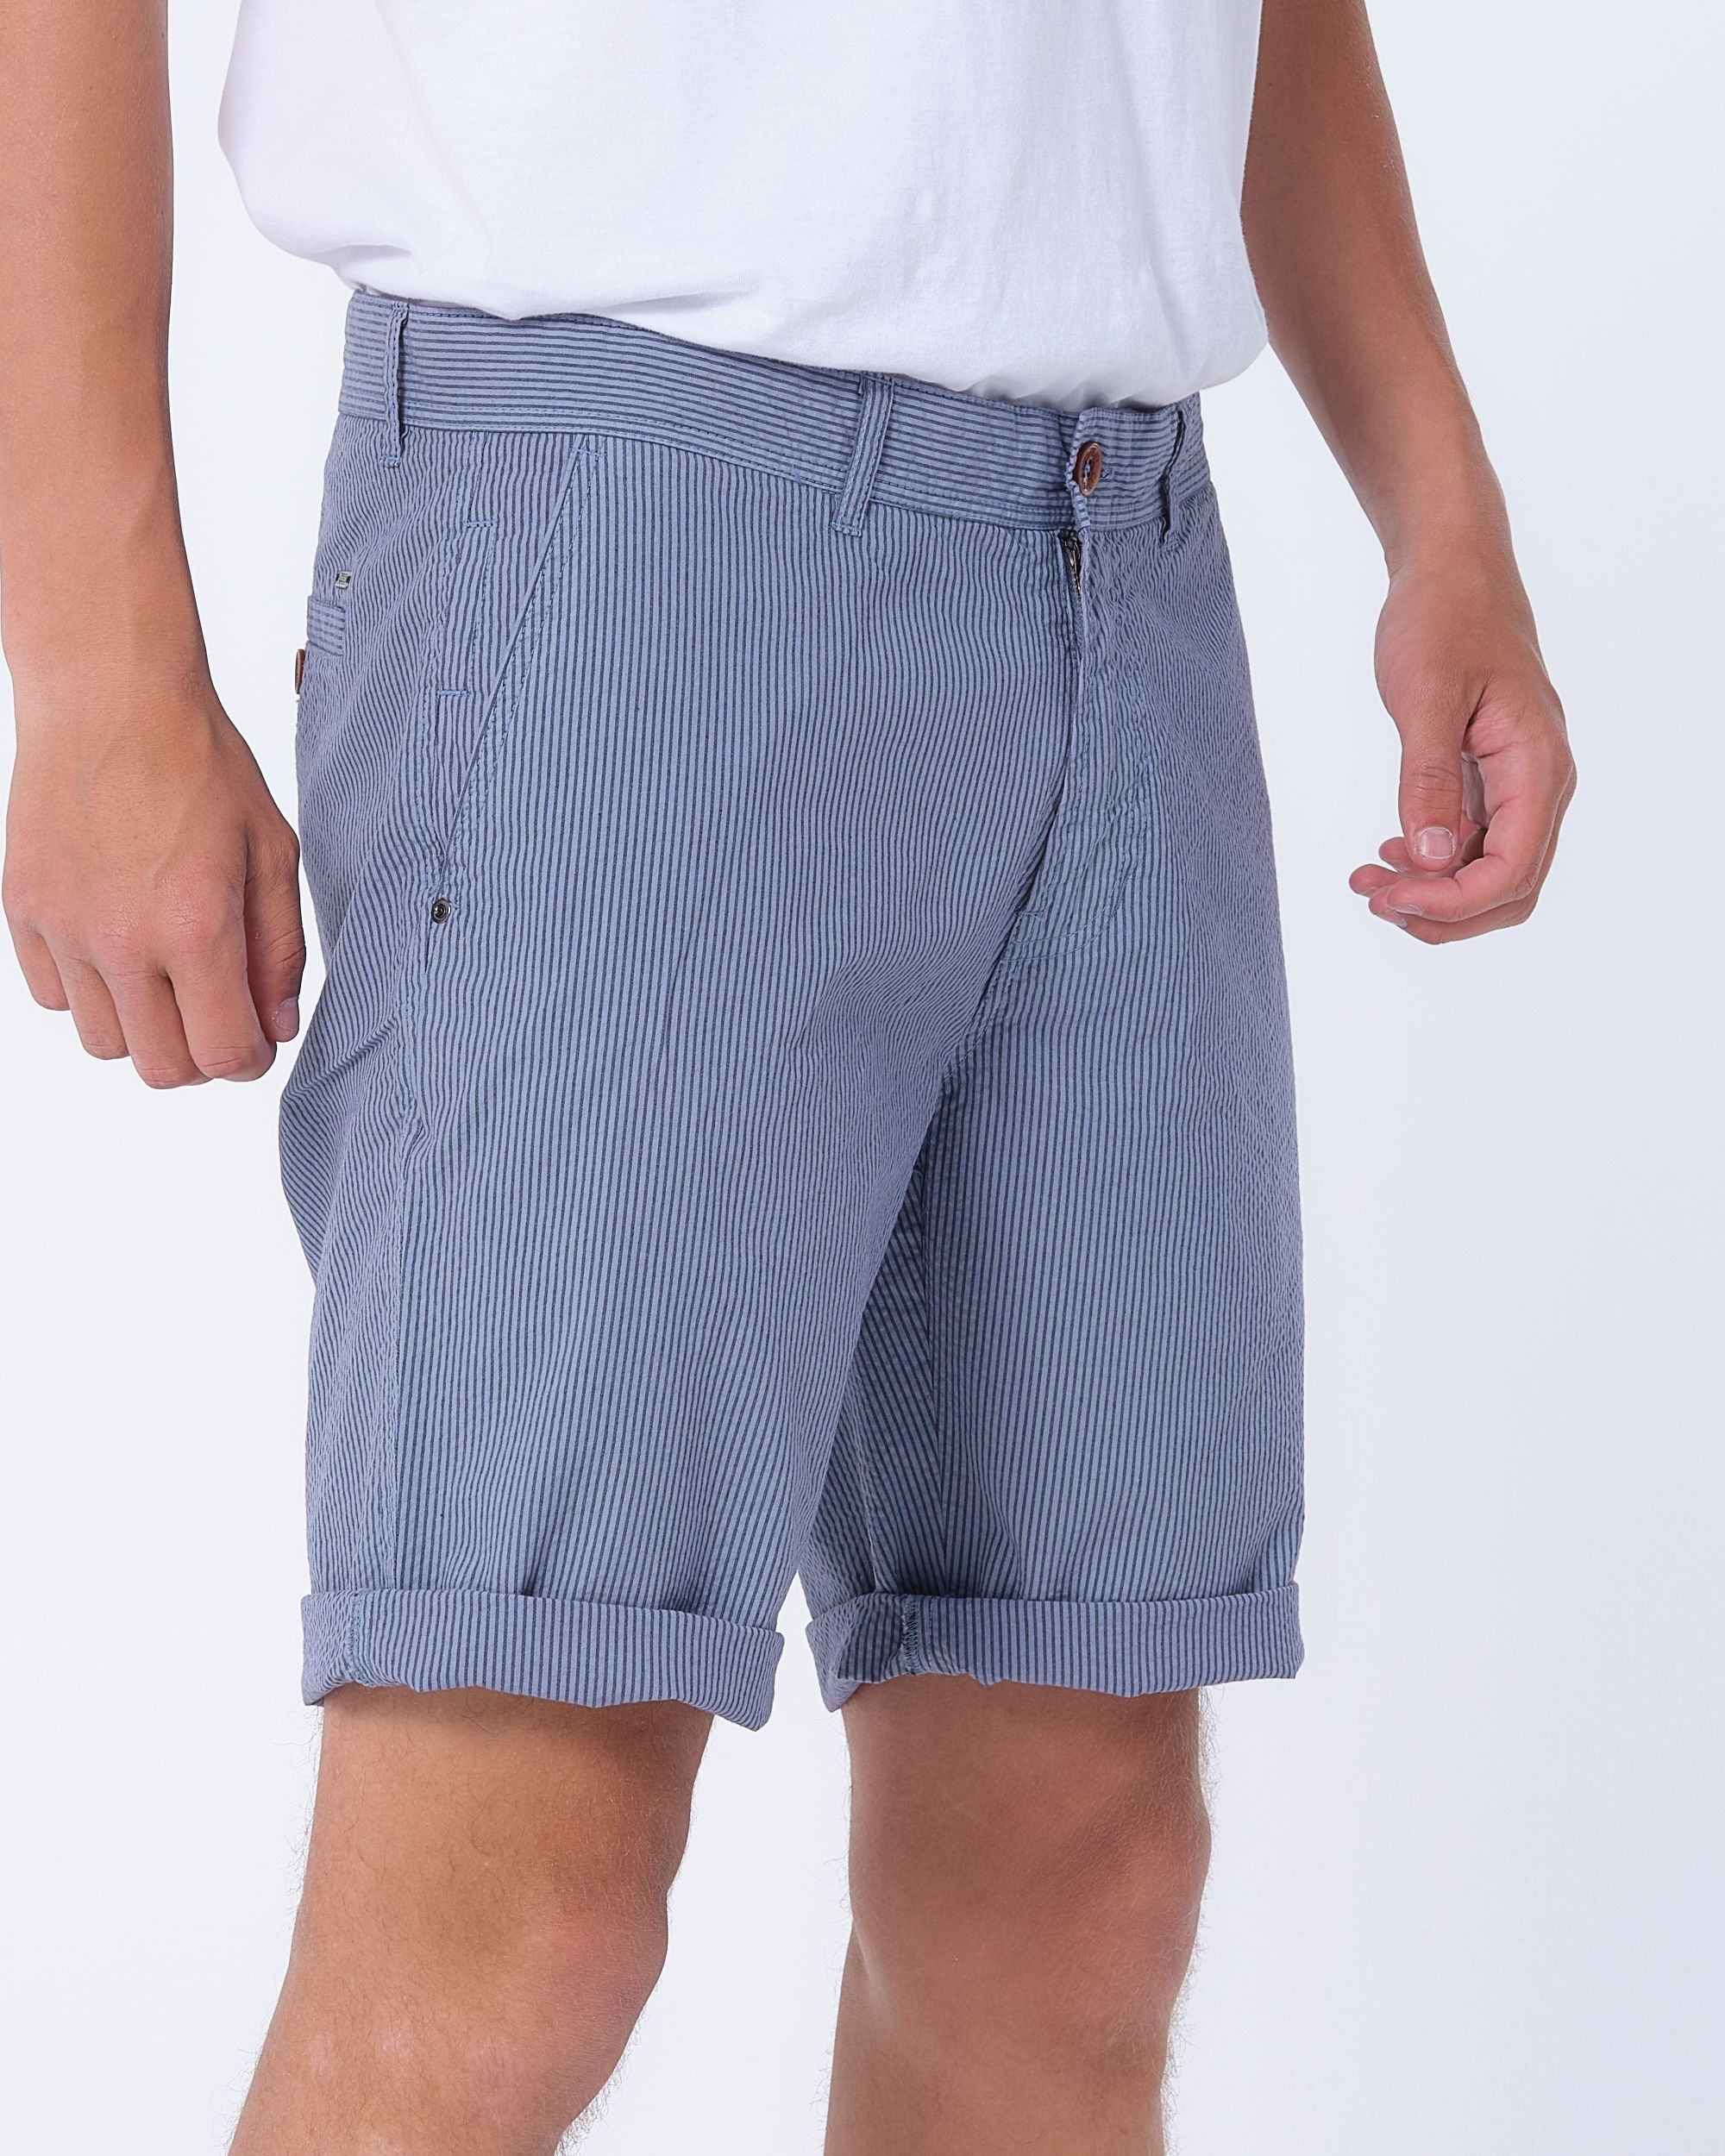 Campbell Classic Short Country Blue stripe 088390-002-30